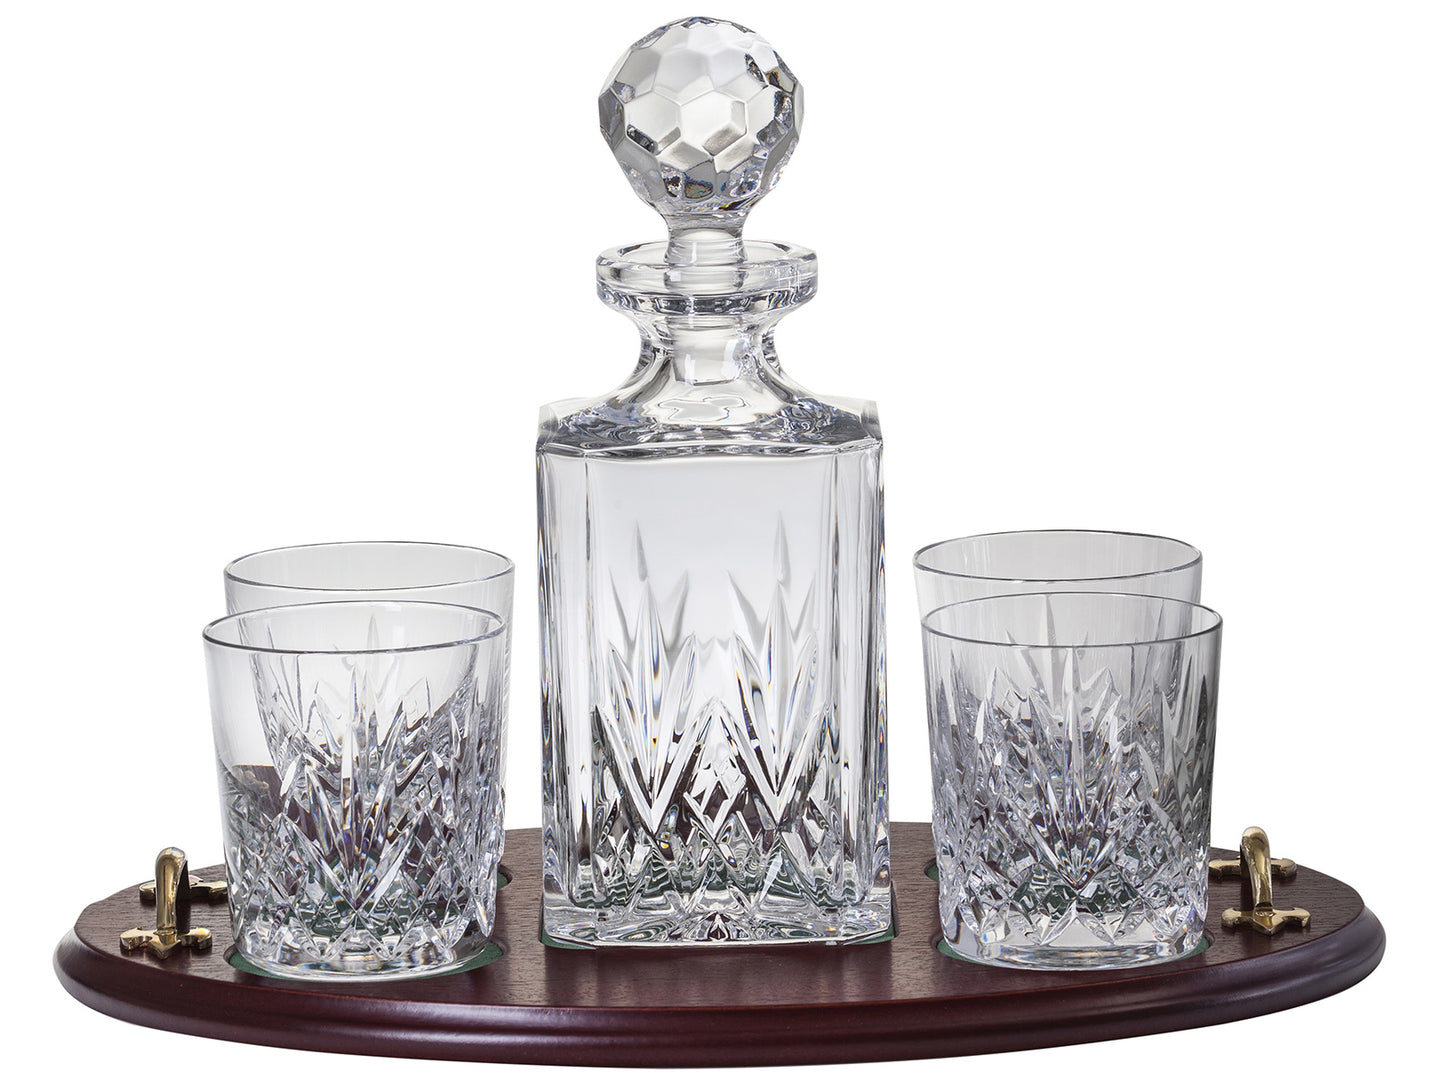 A crystal decanter and four matching whisky glasses with an intricate cut pattern on the outside, all on a wooden serving tray with gold handles